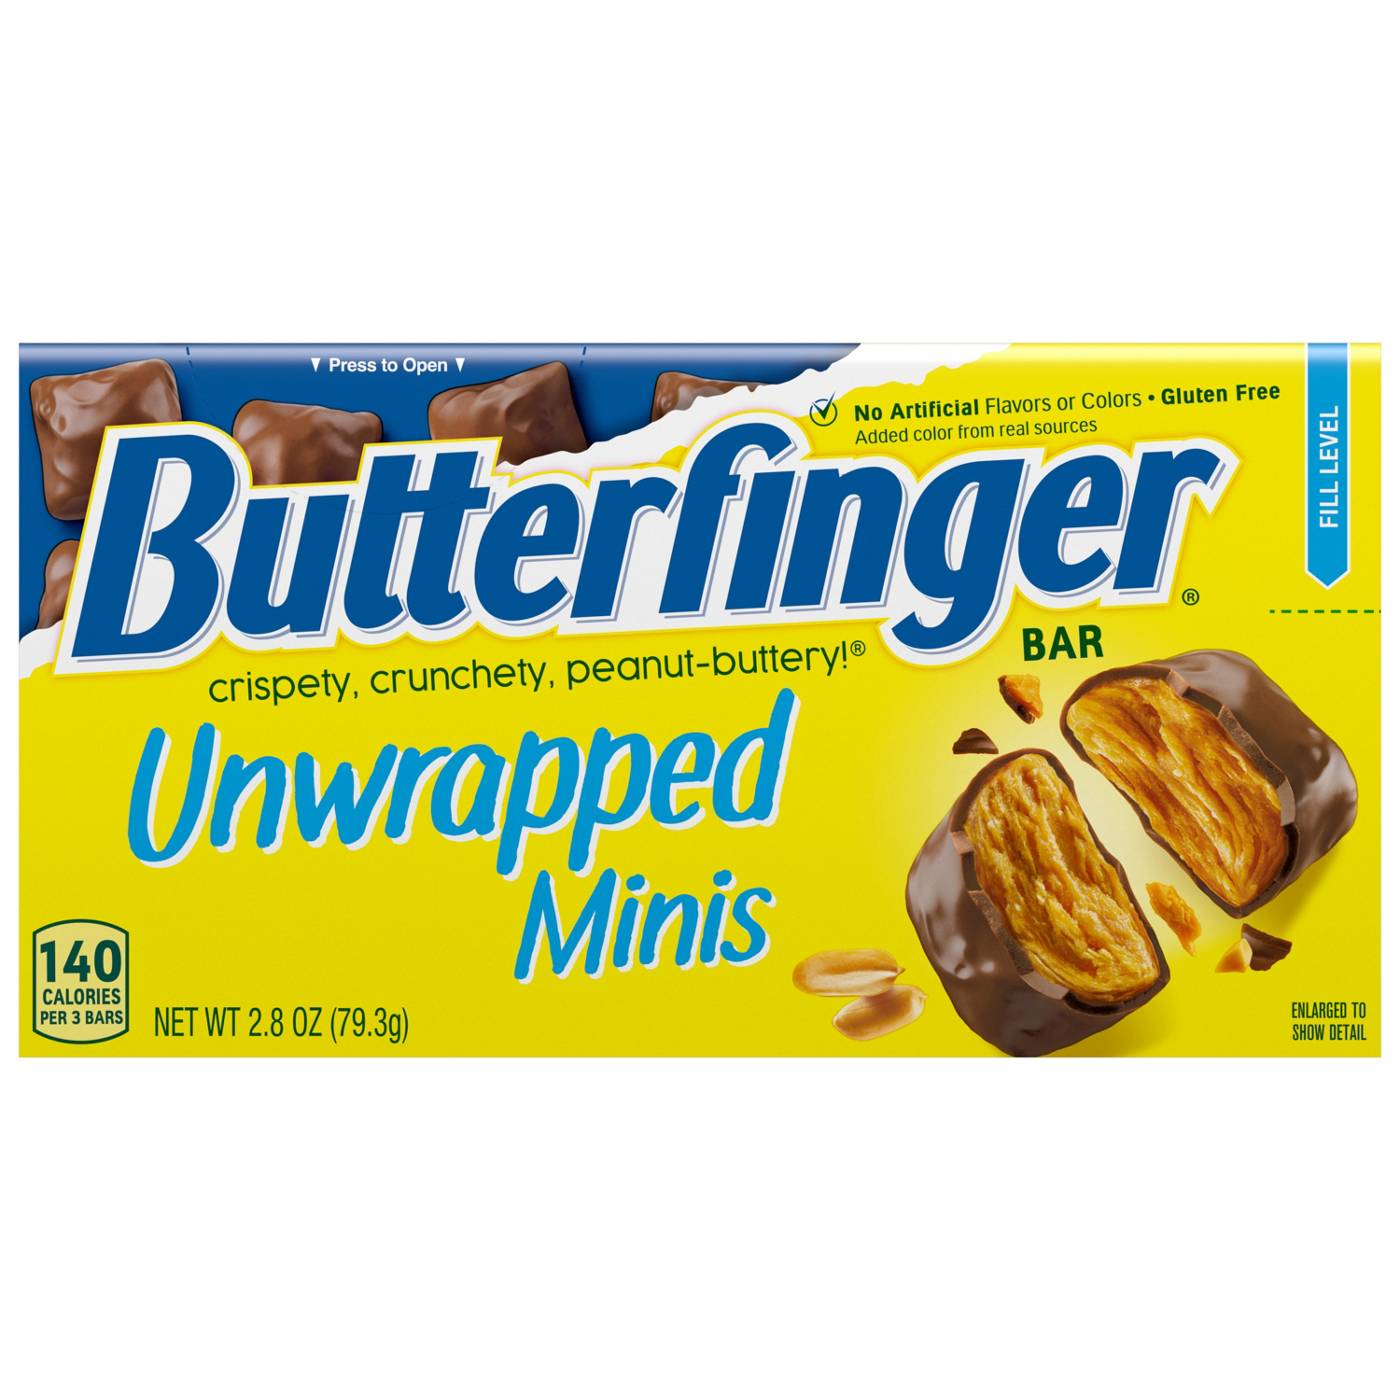 Butterfinger Unwrapped Minis Candy Theater Box; image 1 of 5